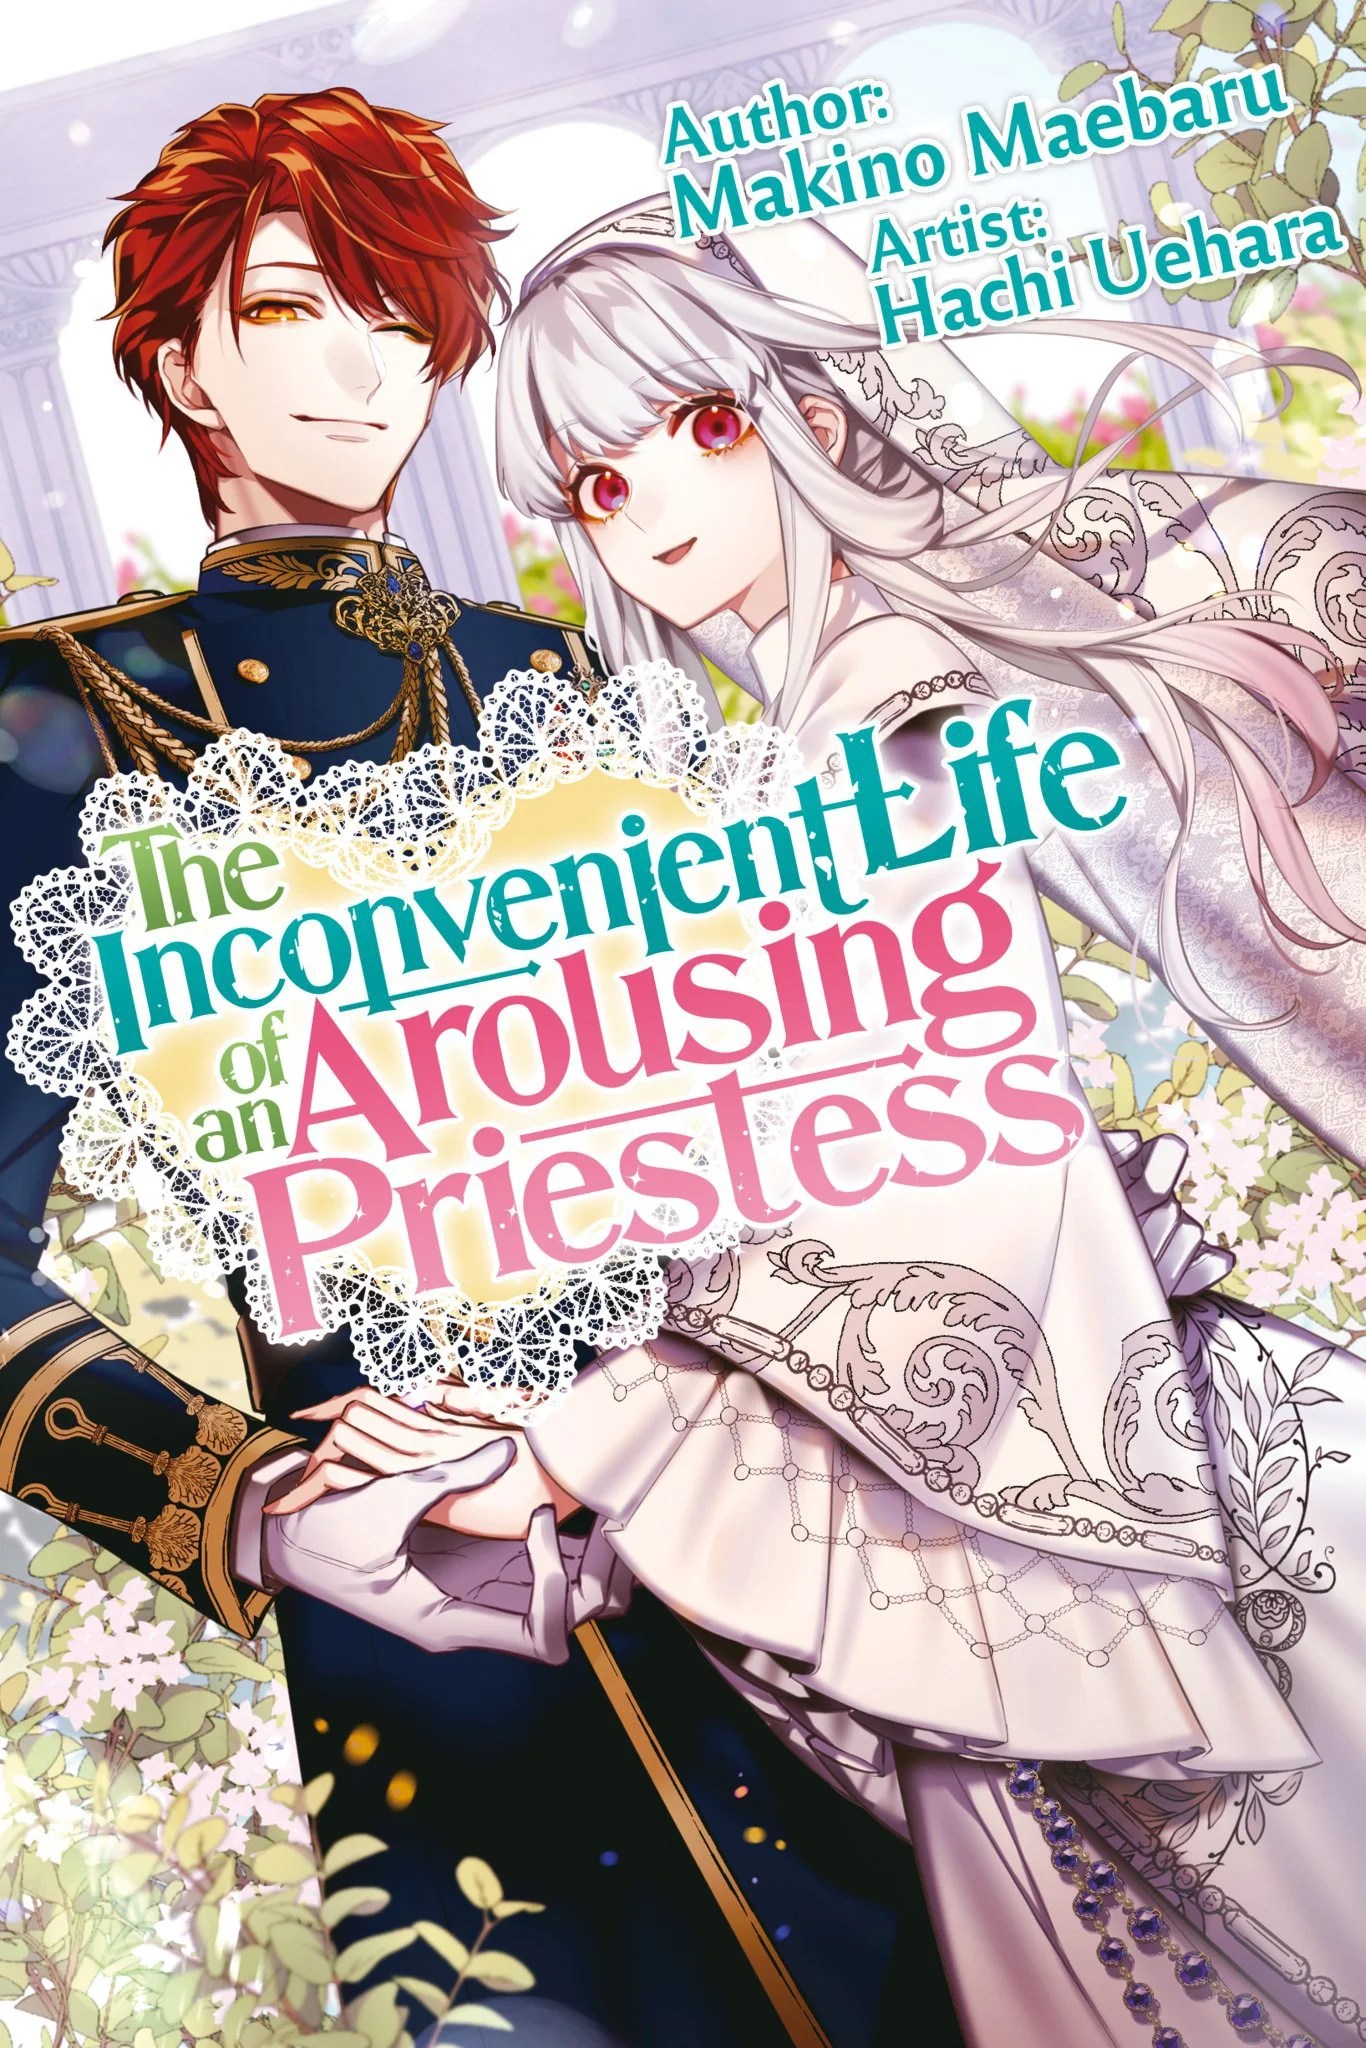 The Inconvenient Life of an Arousing Priestess Review